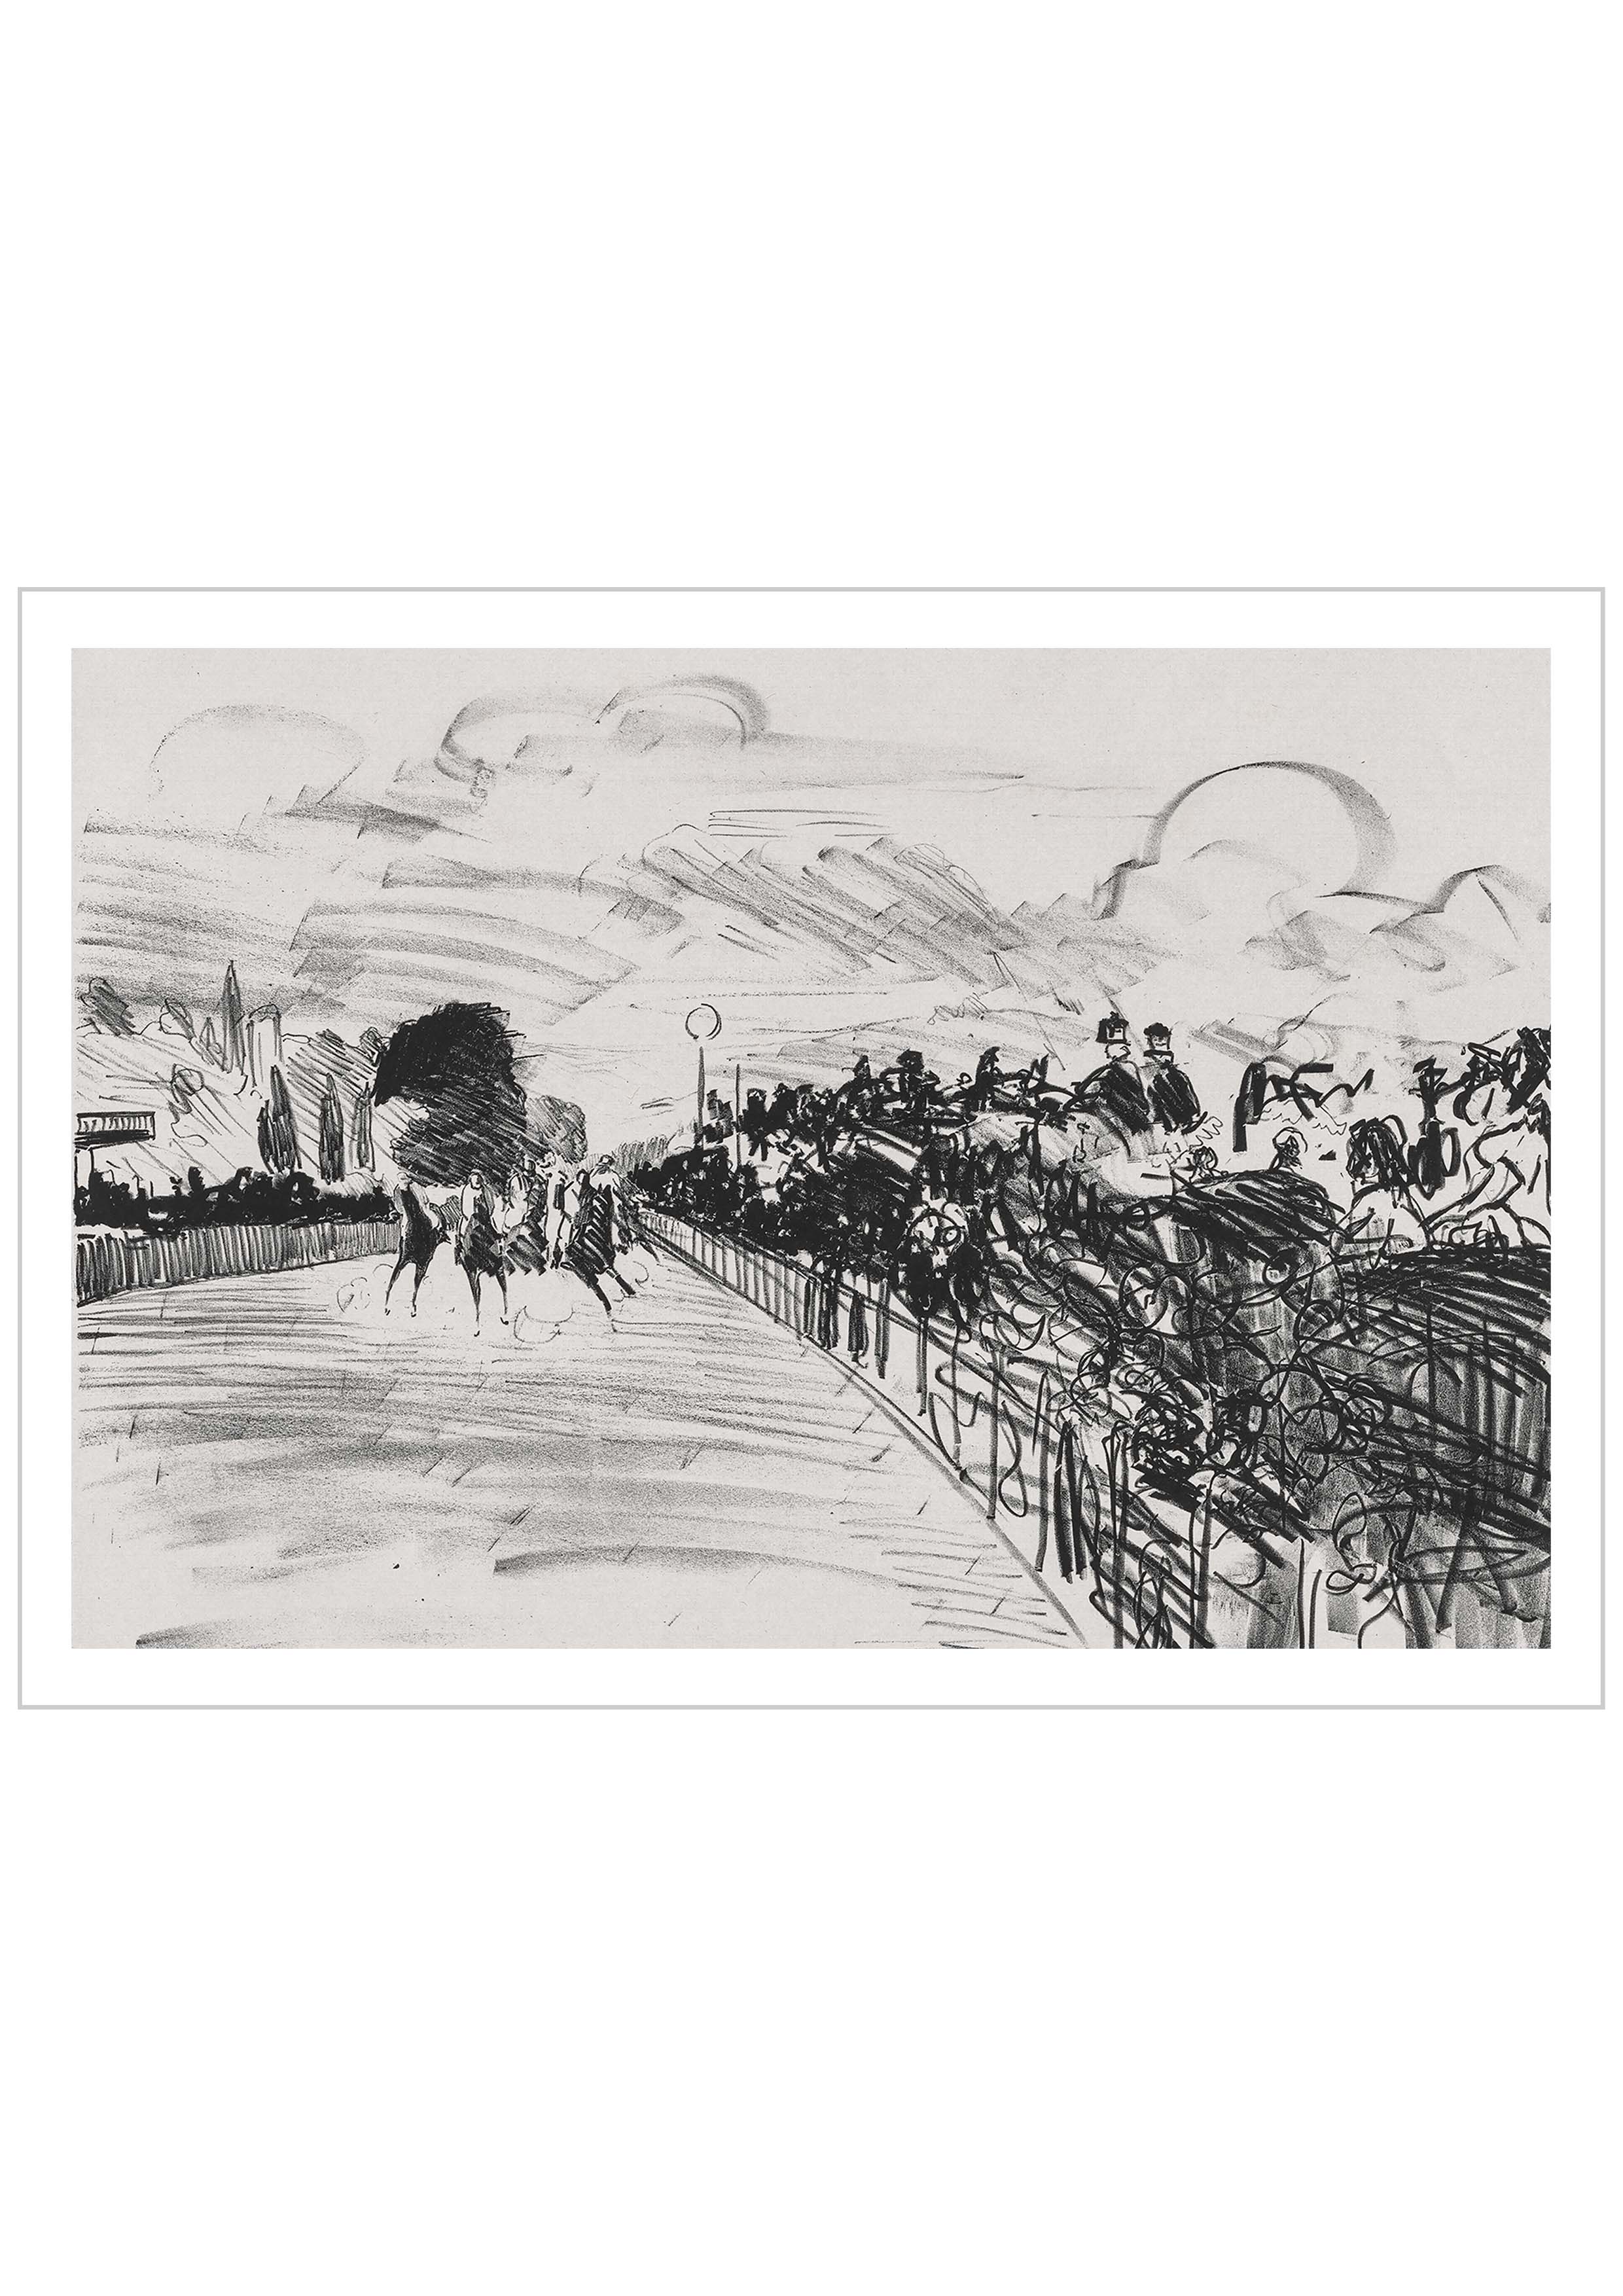 The Races sketch poster, by French artist Edouard Manet